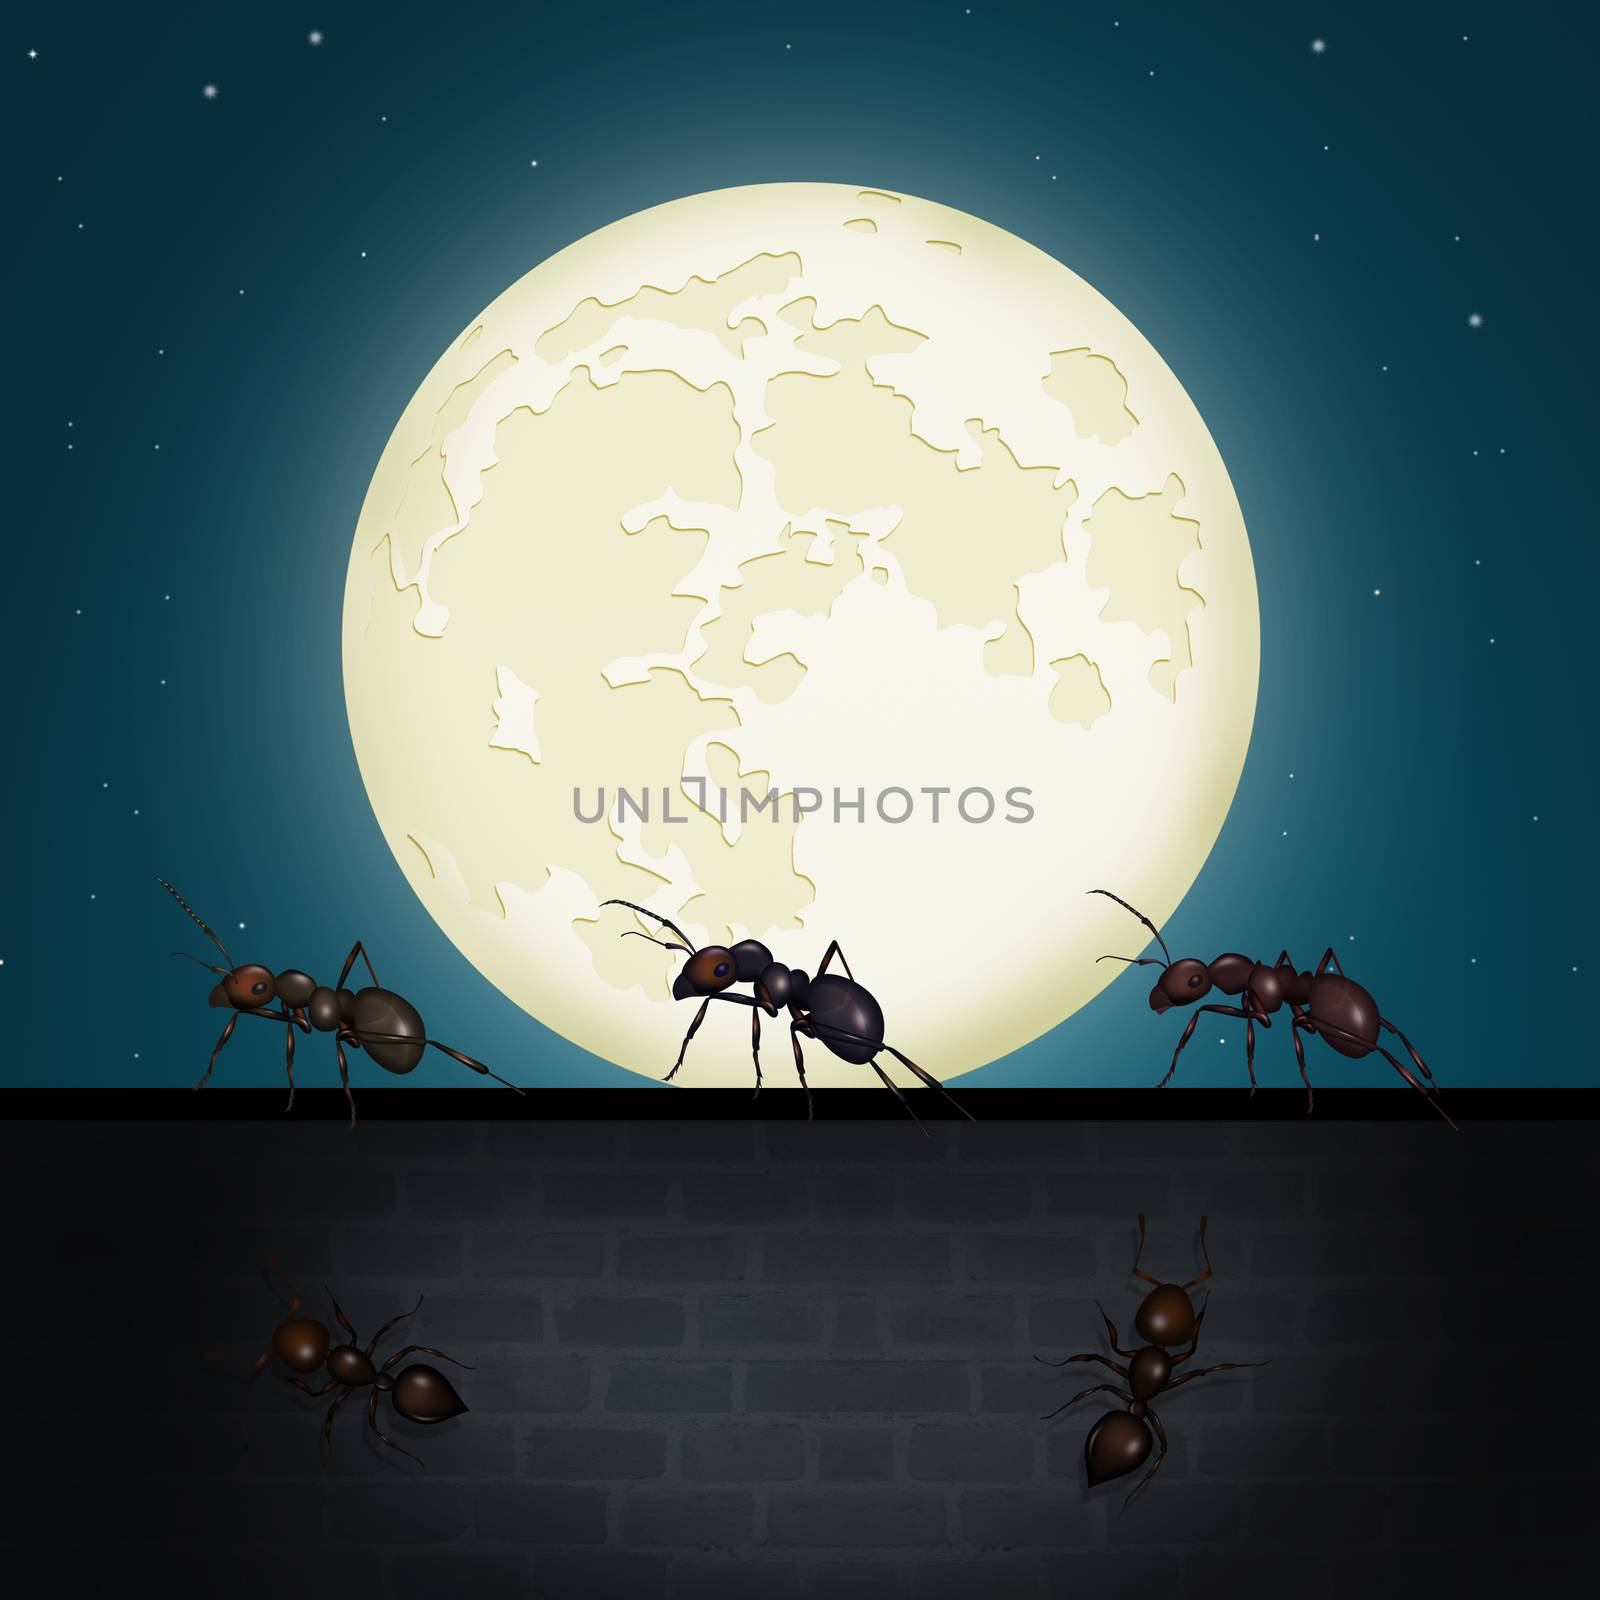 ants team on the wall in the moonlight by adrenalina